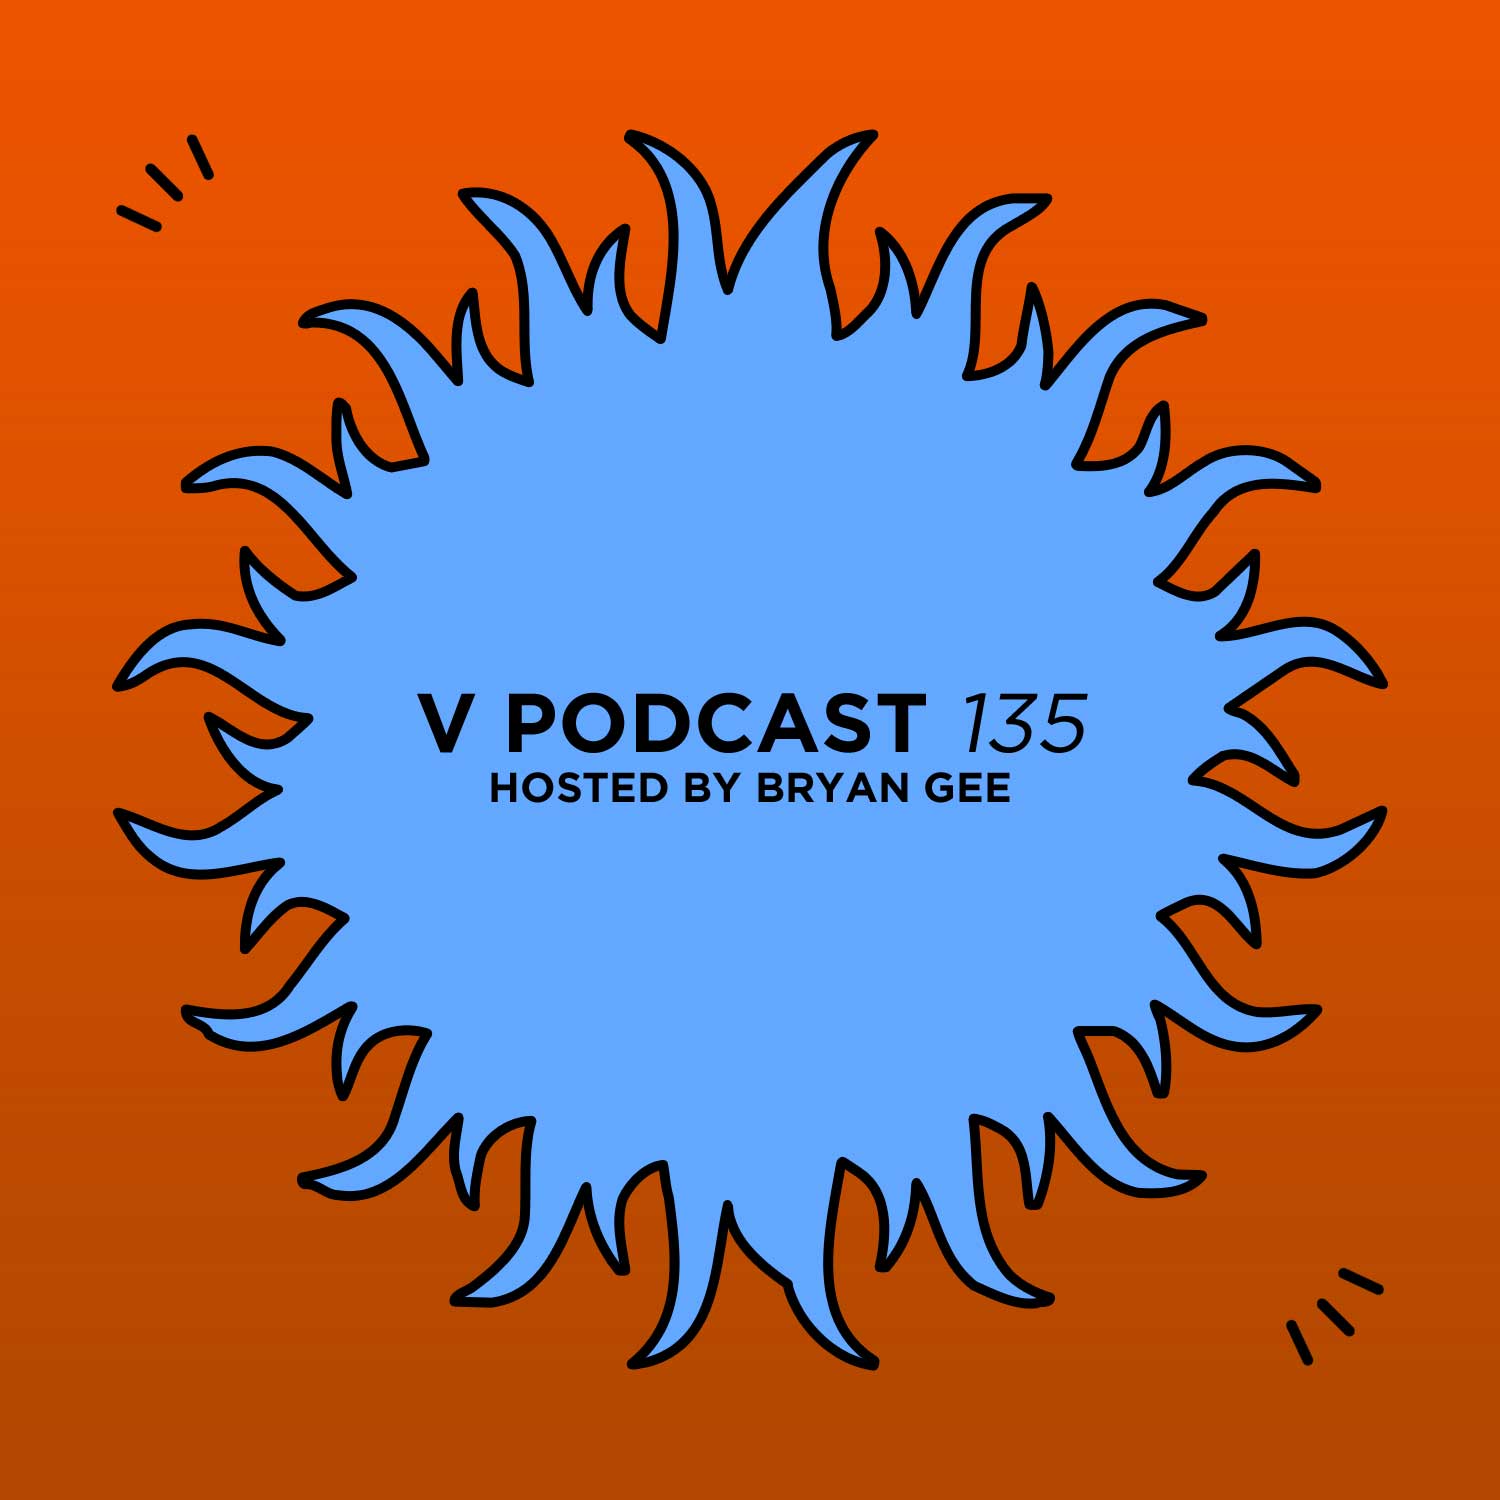 V Podcast 135 - Hosted by Bryan Gee Artwork